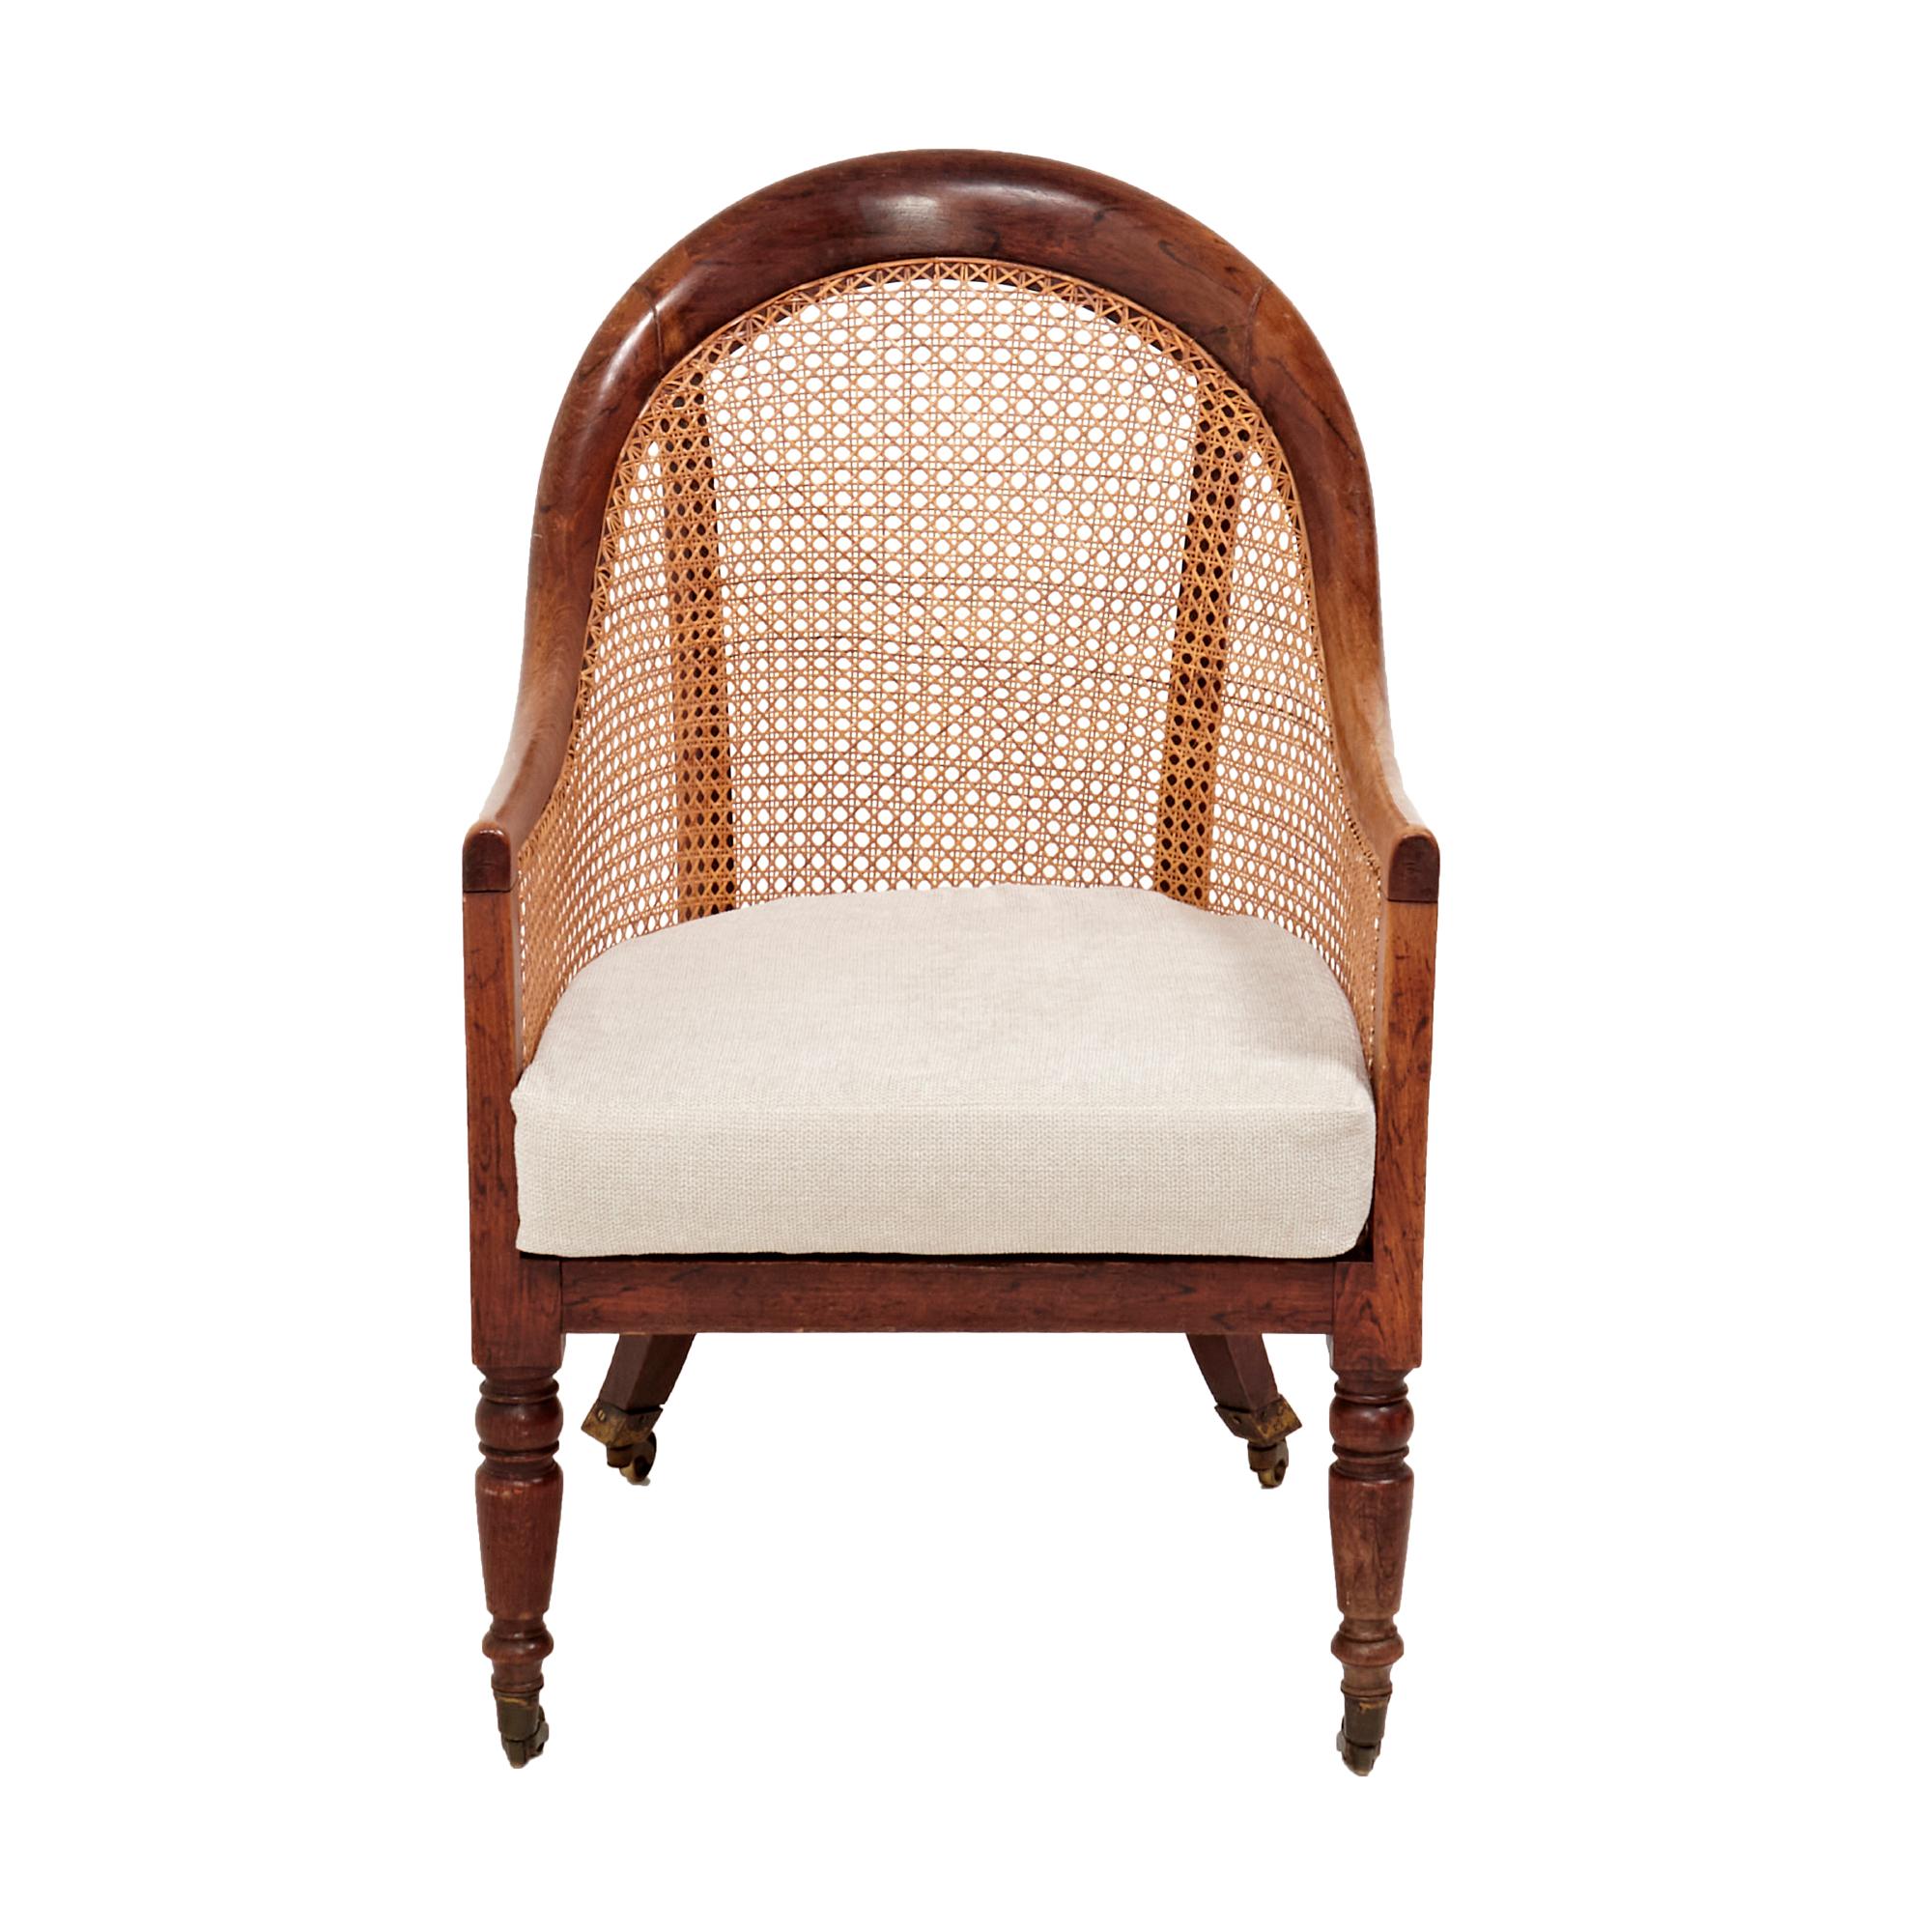 A stunning bergère stained beech armchair.

The chair features the original caning on the backrests and arms while the seat cushion has been newly reupholstered in soft grey fabric for the ultimate comfort.

The legs of the chairs feature unique